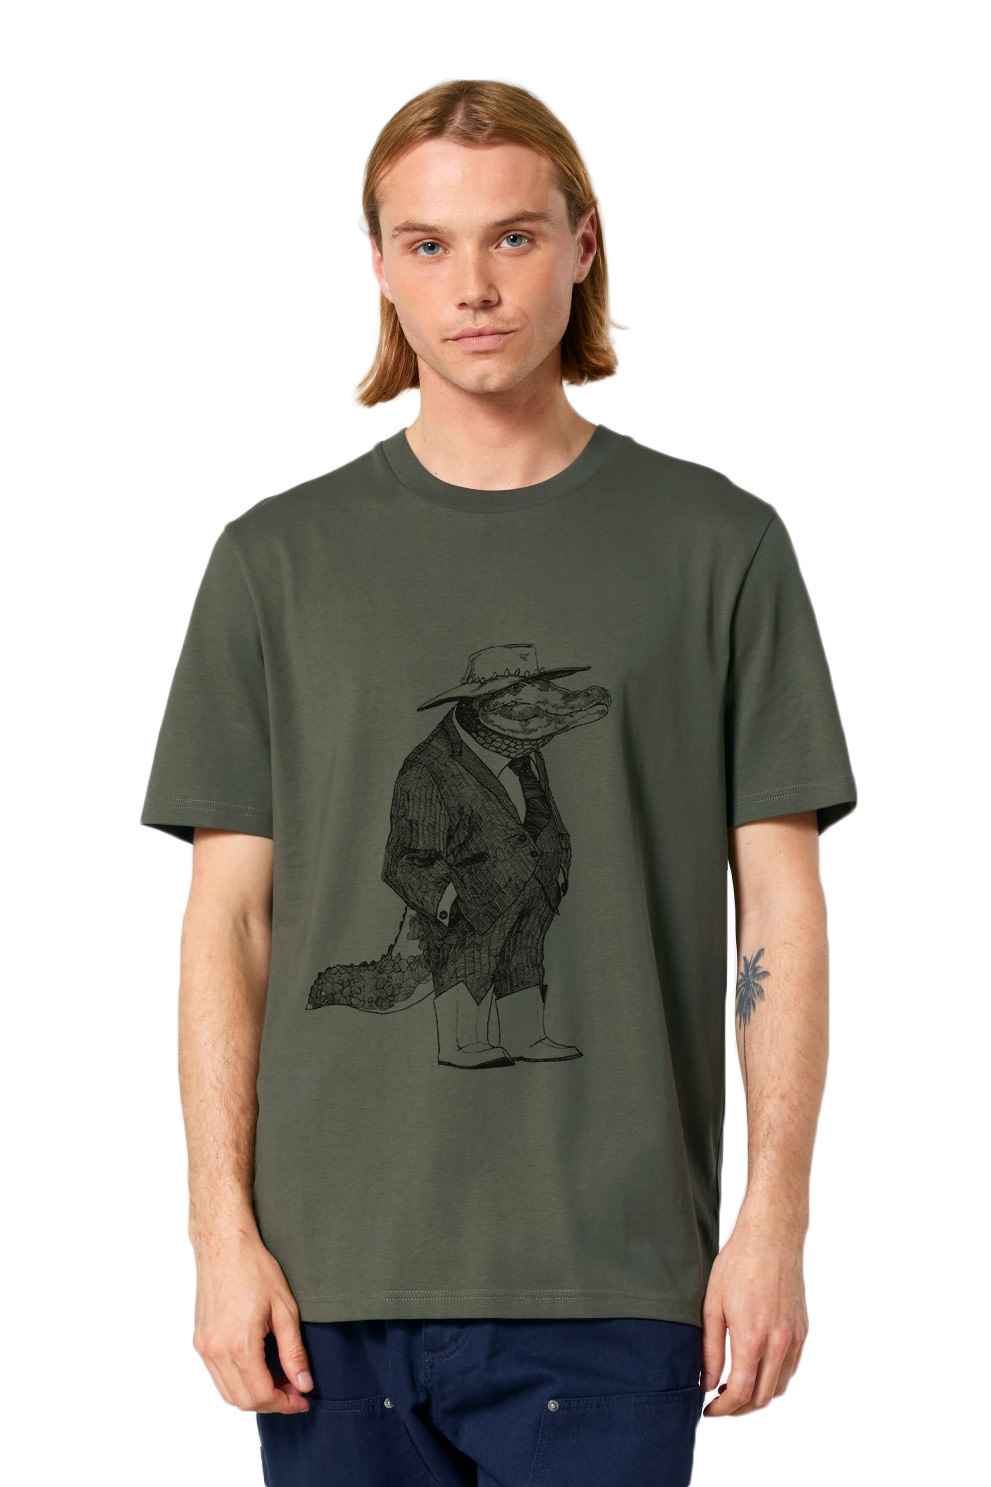 Angus the Alligator T-shirt by Lou Santos